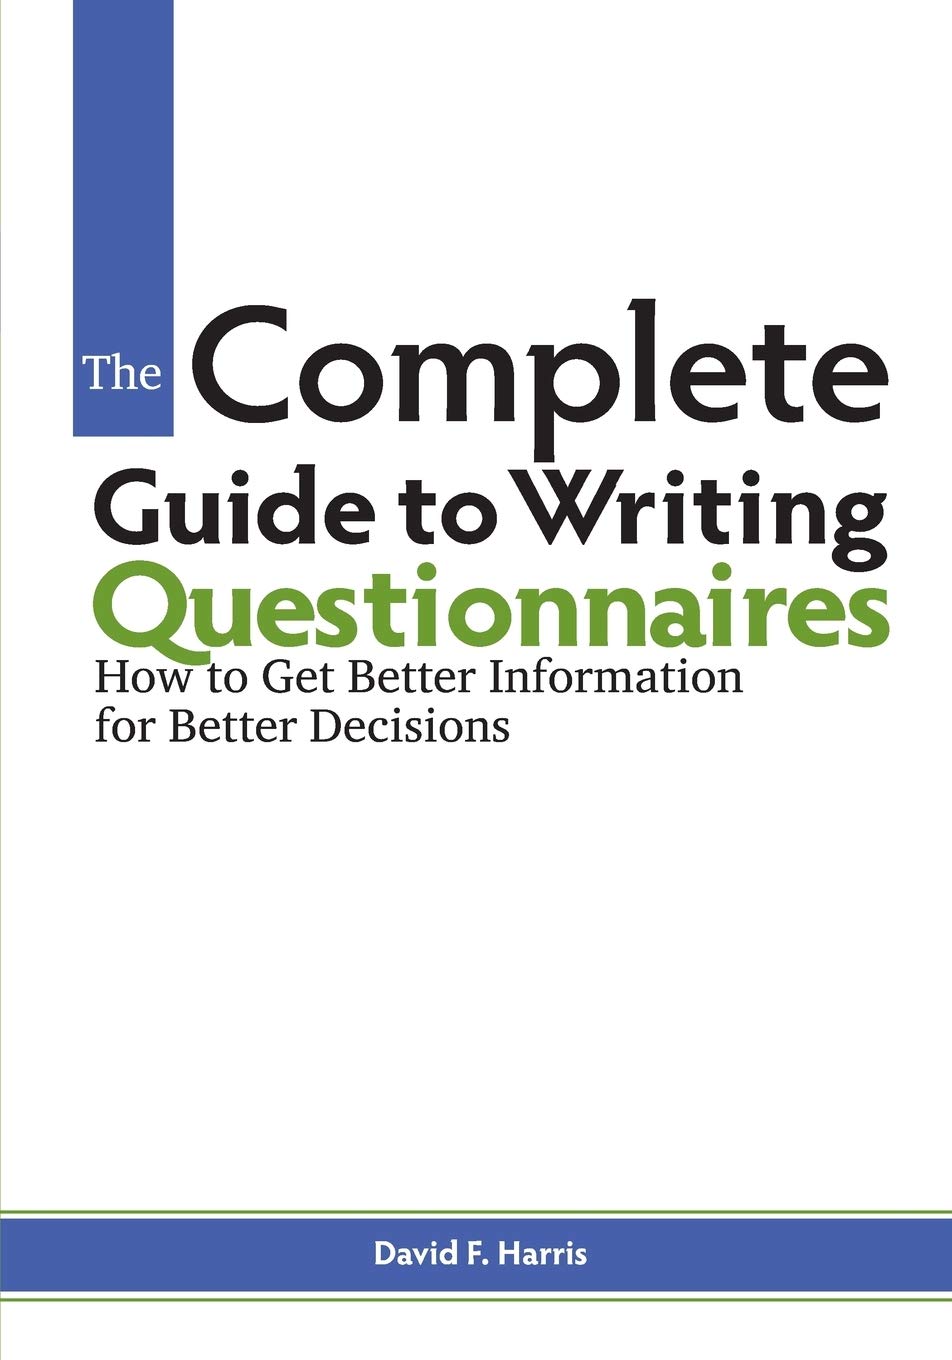 Complete Guide to Writing Questionnaires book cover